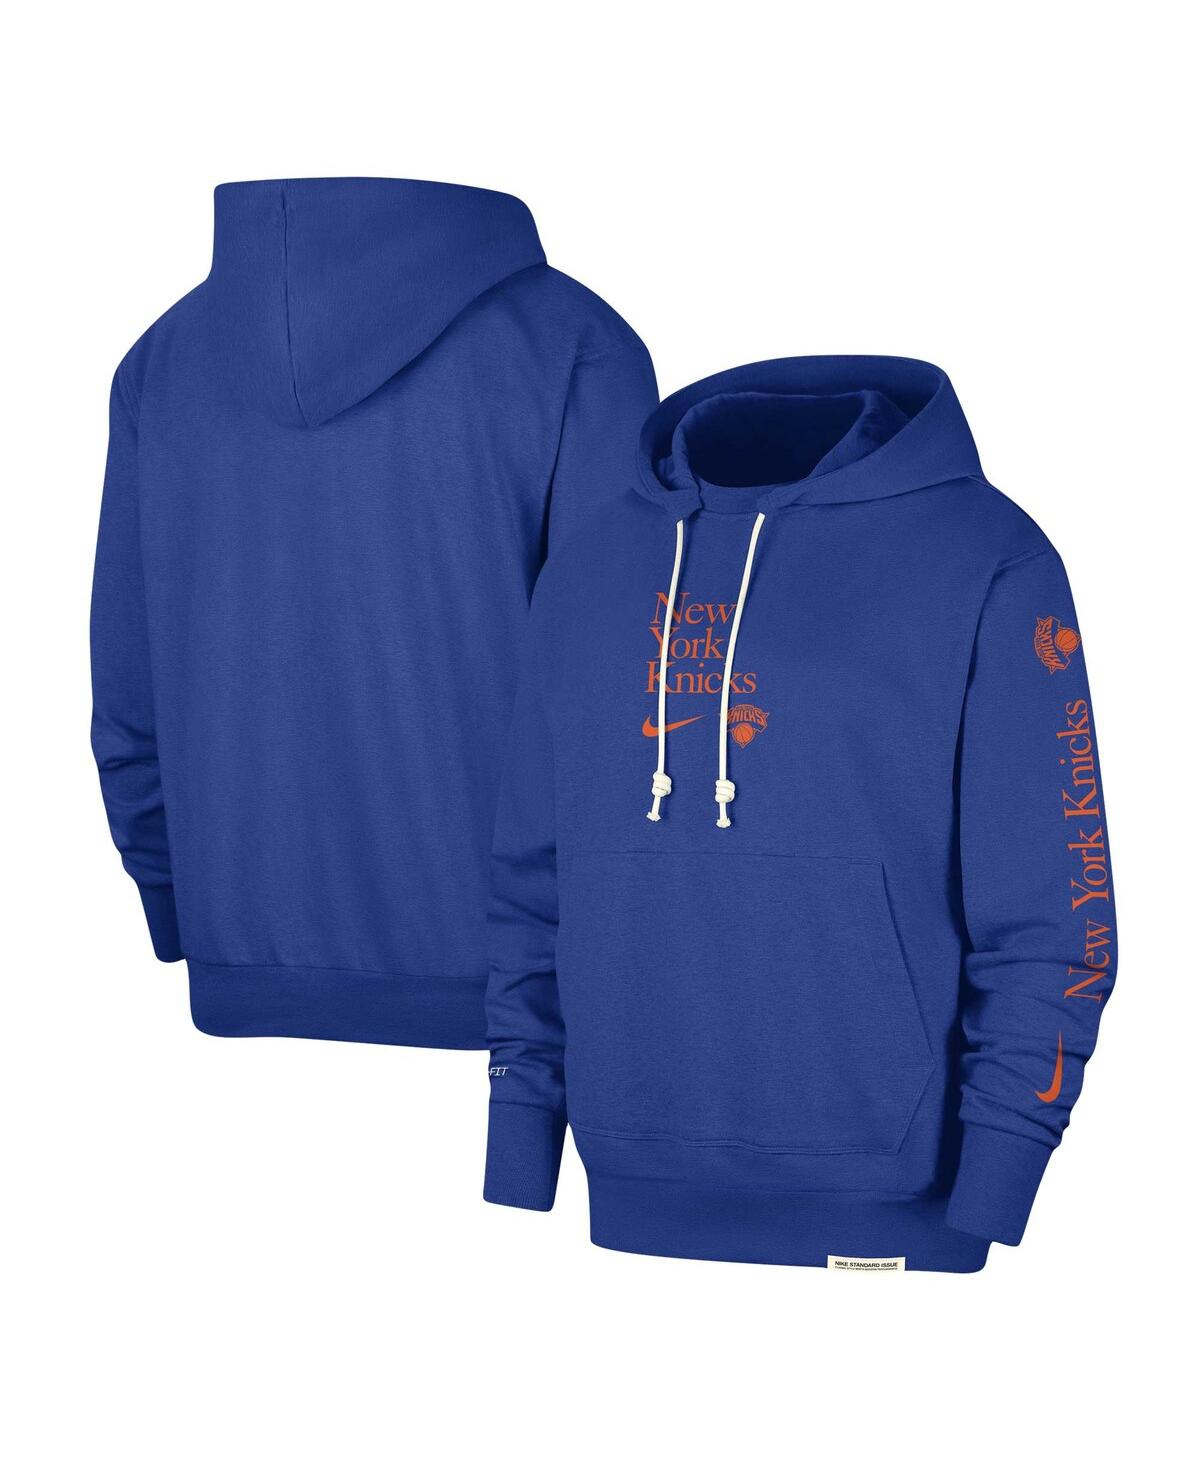 Shop Nike Men's  Blue New York Knicks Authentic Performance Pullover Hoodie